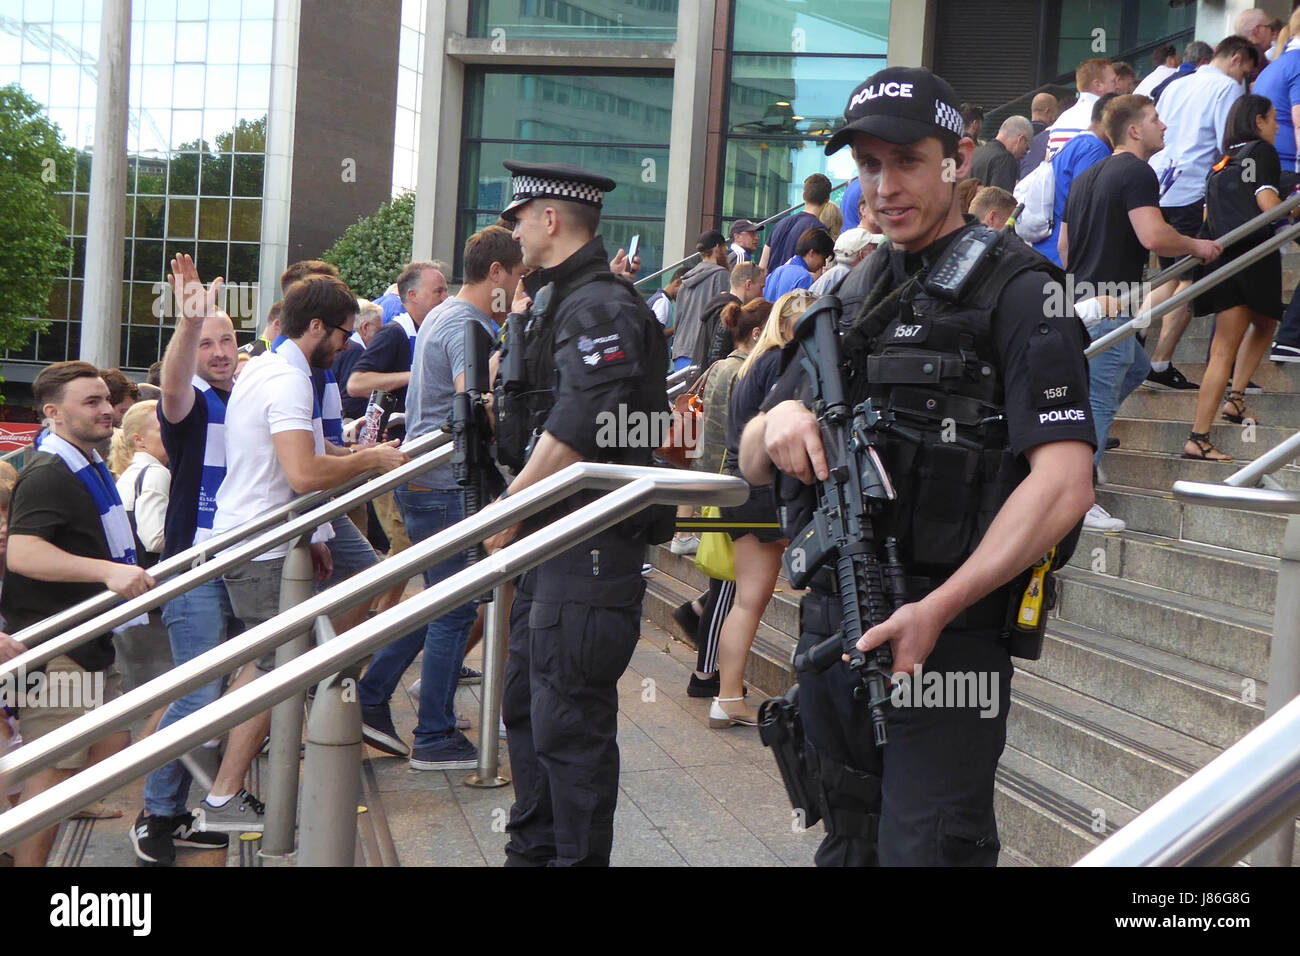 London, UK. 27th May, 2017. Police and armed police watch over FA Cup final fans at Wembley London Credit: Nigel Bowles/Alamy Live News Stock Photo